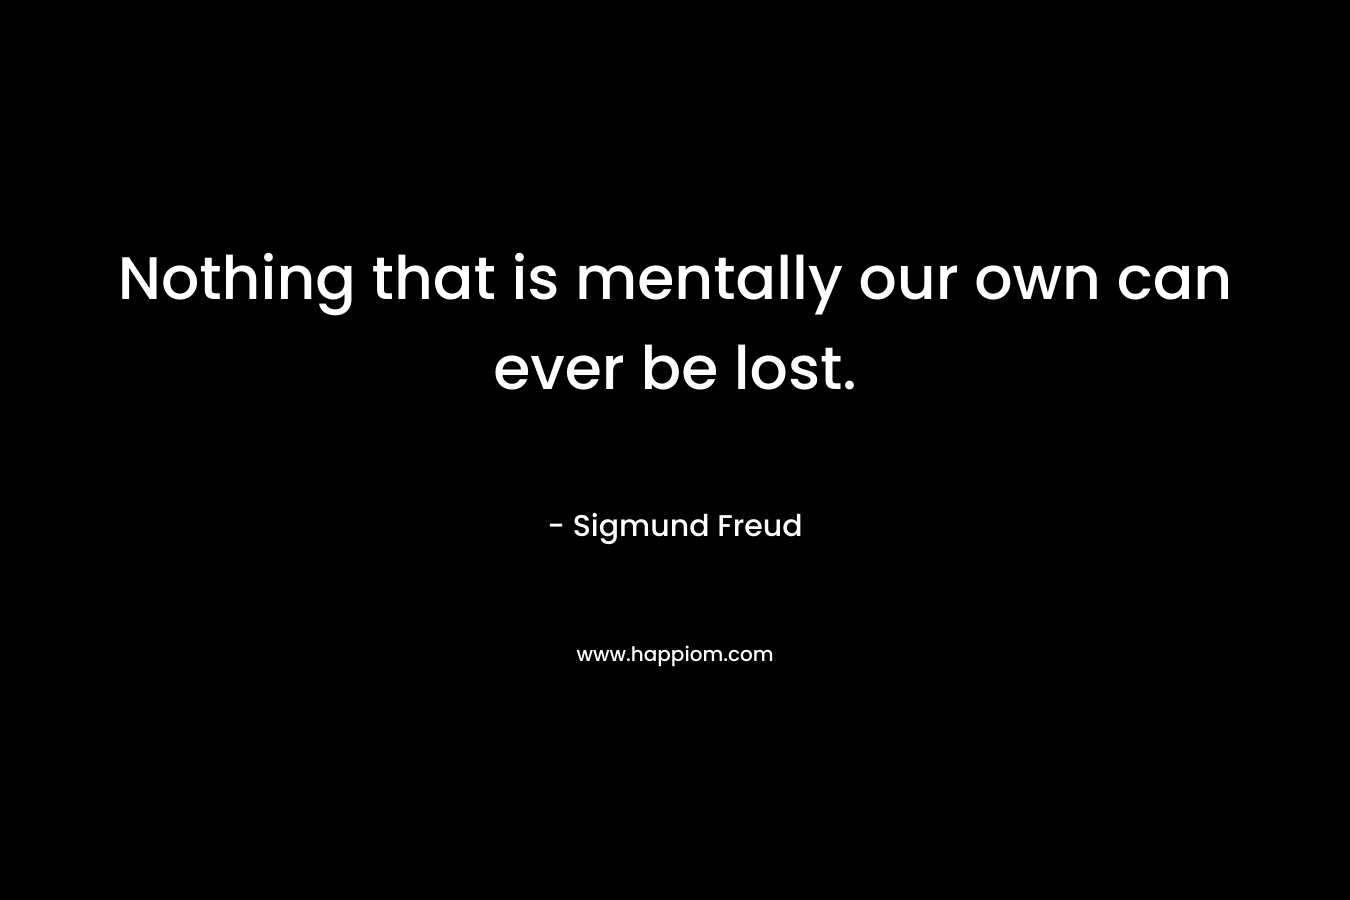 Nothing that is mentally our own can ever be lost.